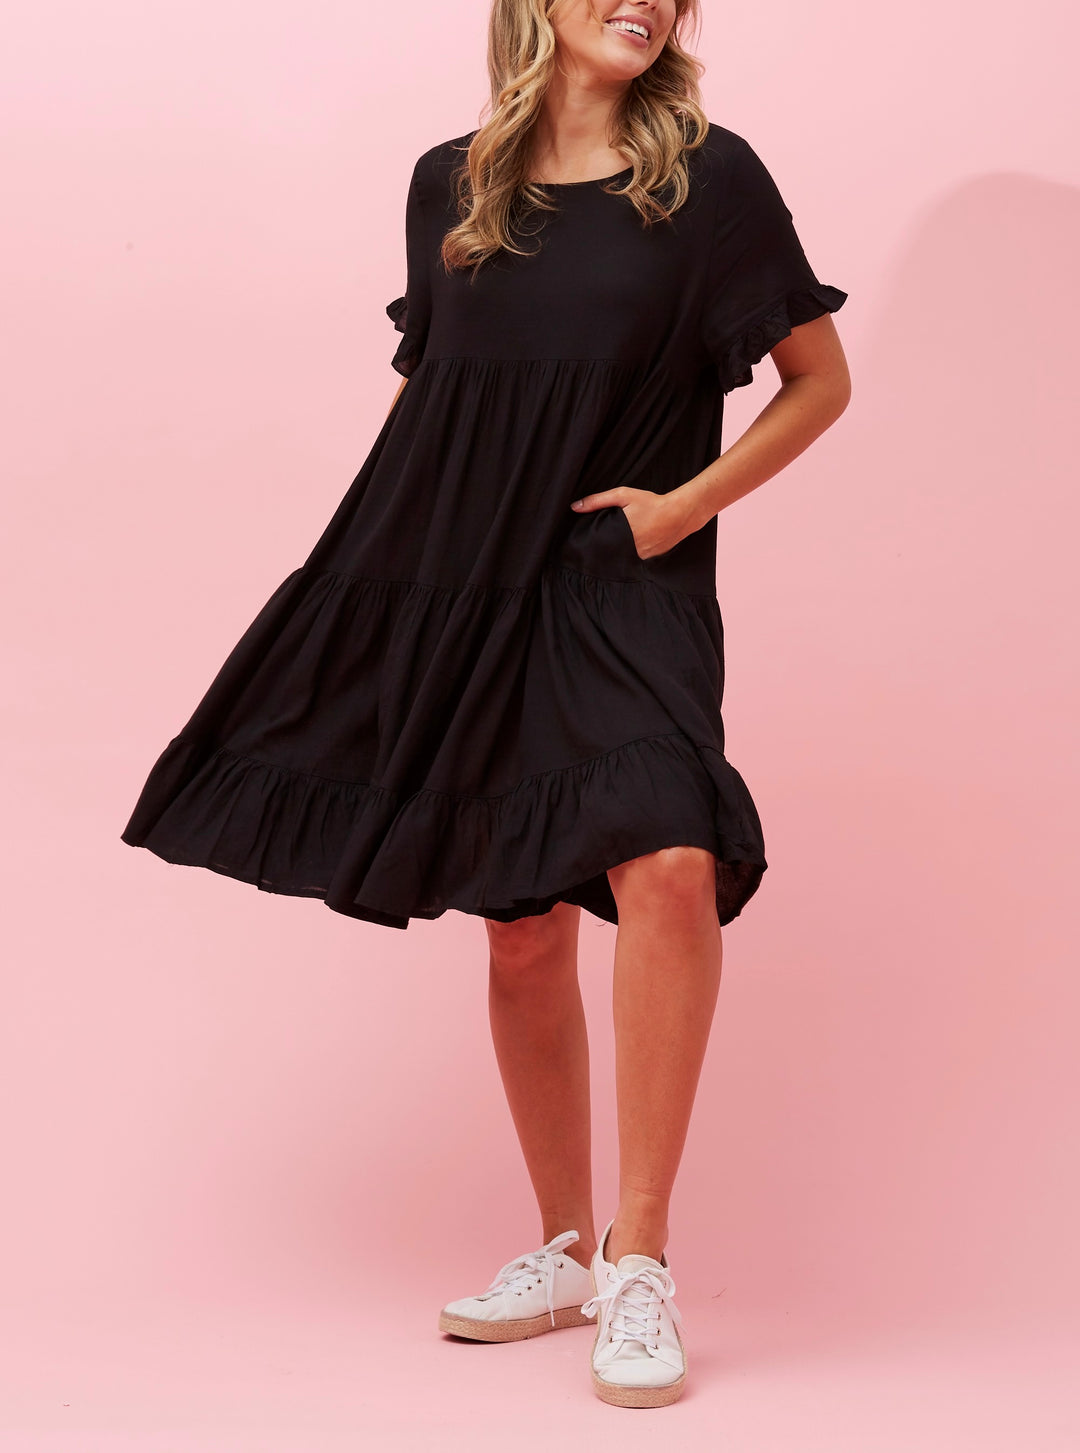 Tall Girl's Guide to a Babydoll Dress - StyleDahlia Top Picks